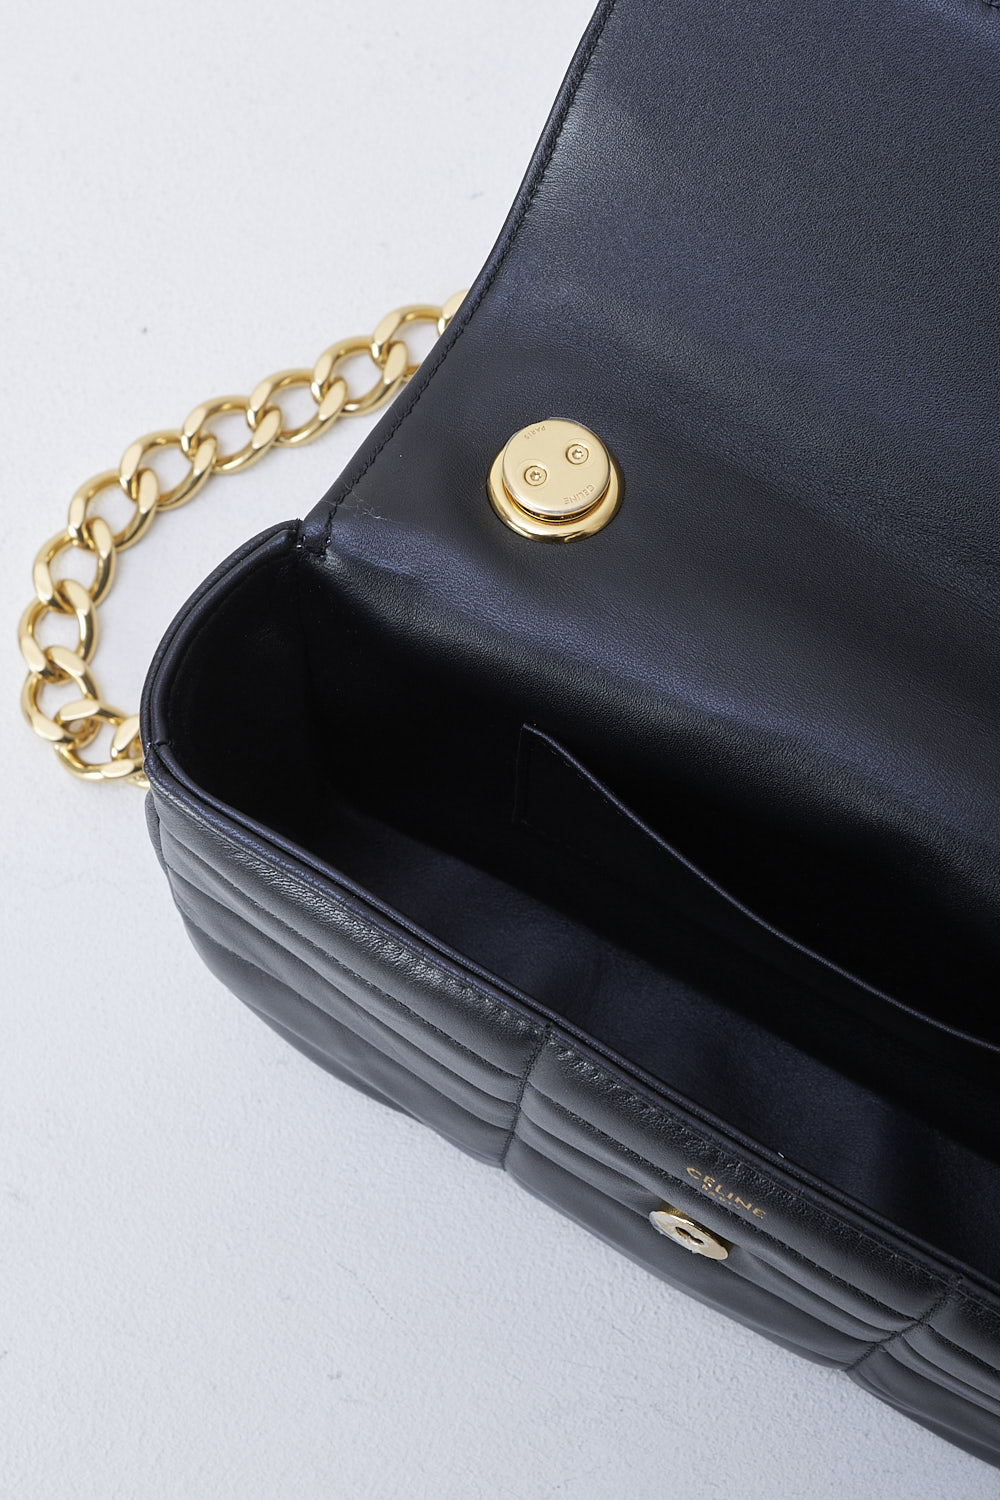 CELINE, BLACK MATELASSÉ SHOULDER BAG WITH GOLD CHAIN, 111273EPZ_38NO, Black, Detail 1, This black matelassé shoulder bag has gold-tone metal hardware with the brand's lettering on the front and a gold chain shoulder strap. The bag has a snap button closure. The flap opens to the main compartment with a inner pocket to the backside


